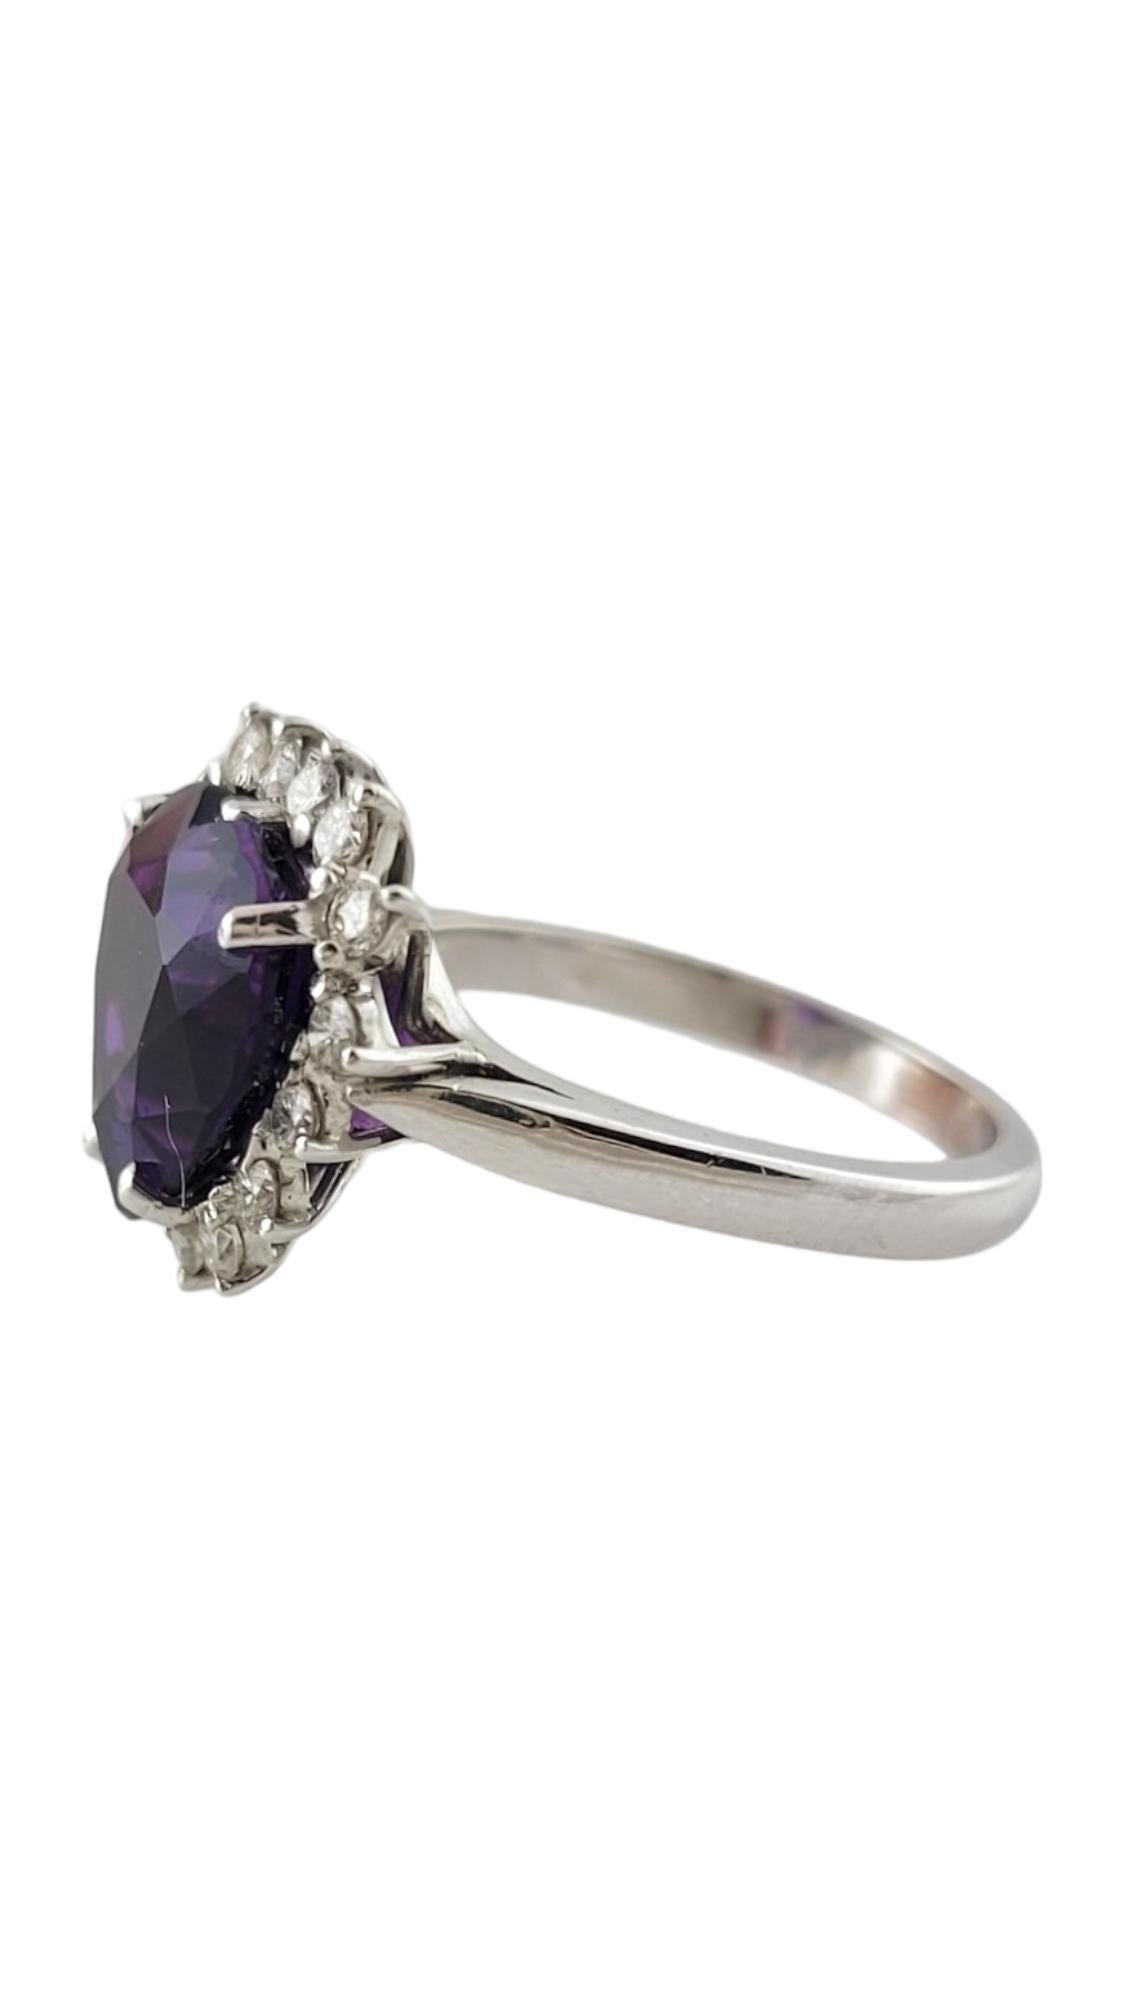 14K White Gold Diamond & Amethyst Halo Style Ring Size 6.25

This beautiful 14K white gold ring features a heart shaped cut amethyst stone with a halo of 15 sparkling, round brilliant cut diamonds!

Heart shaped amethyst is approx. 4.07 cts, eye